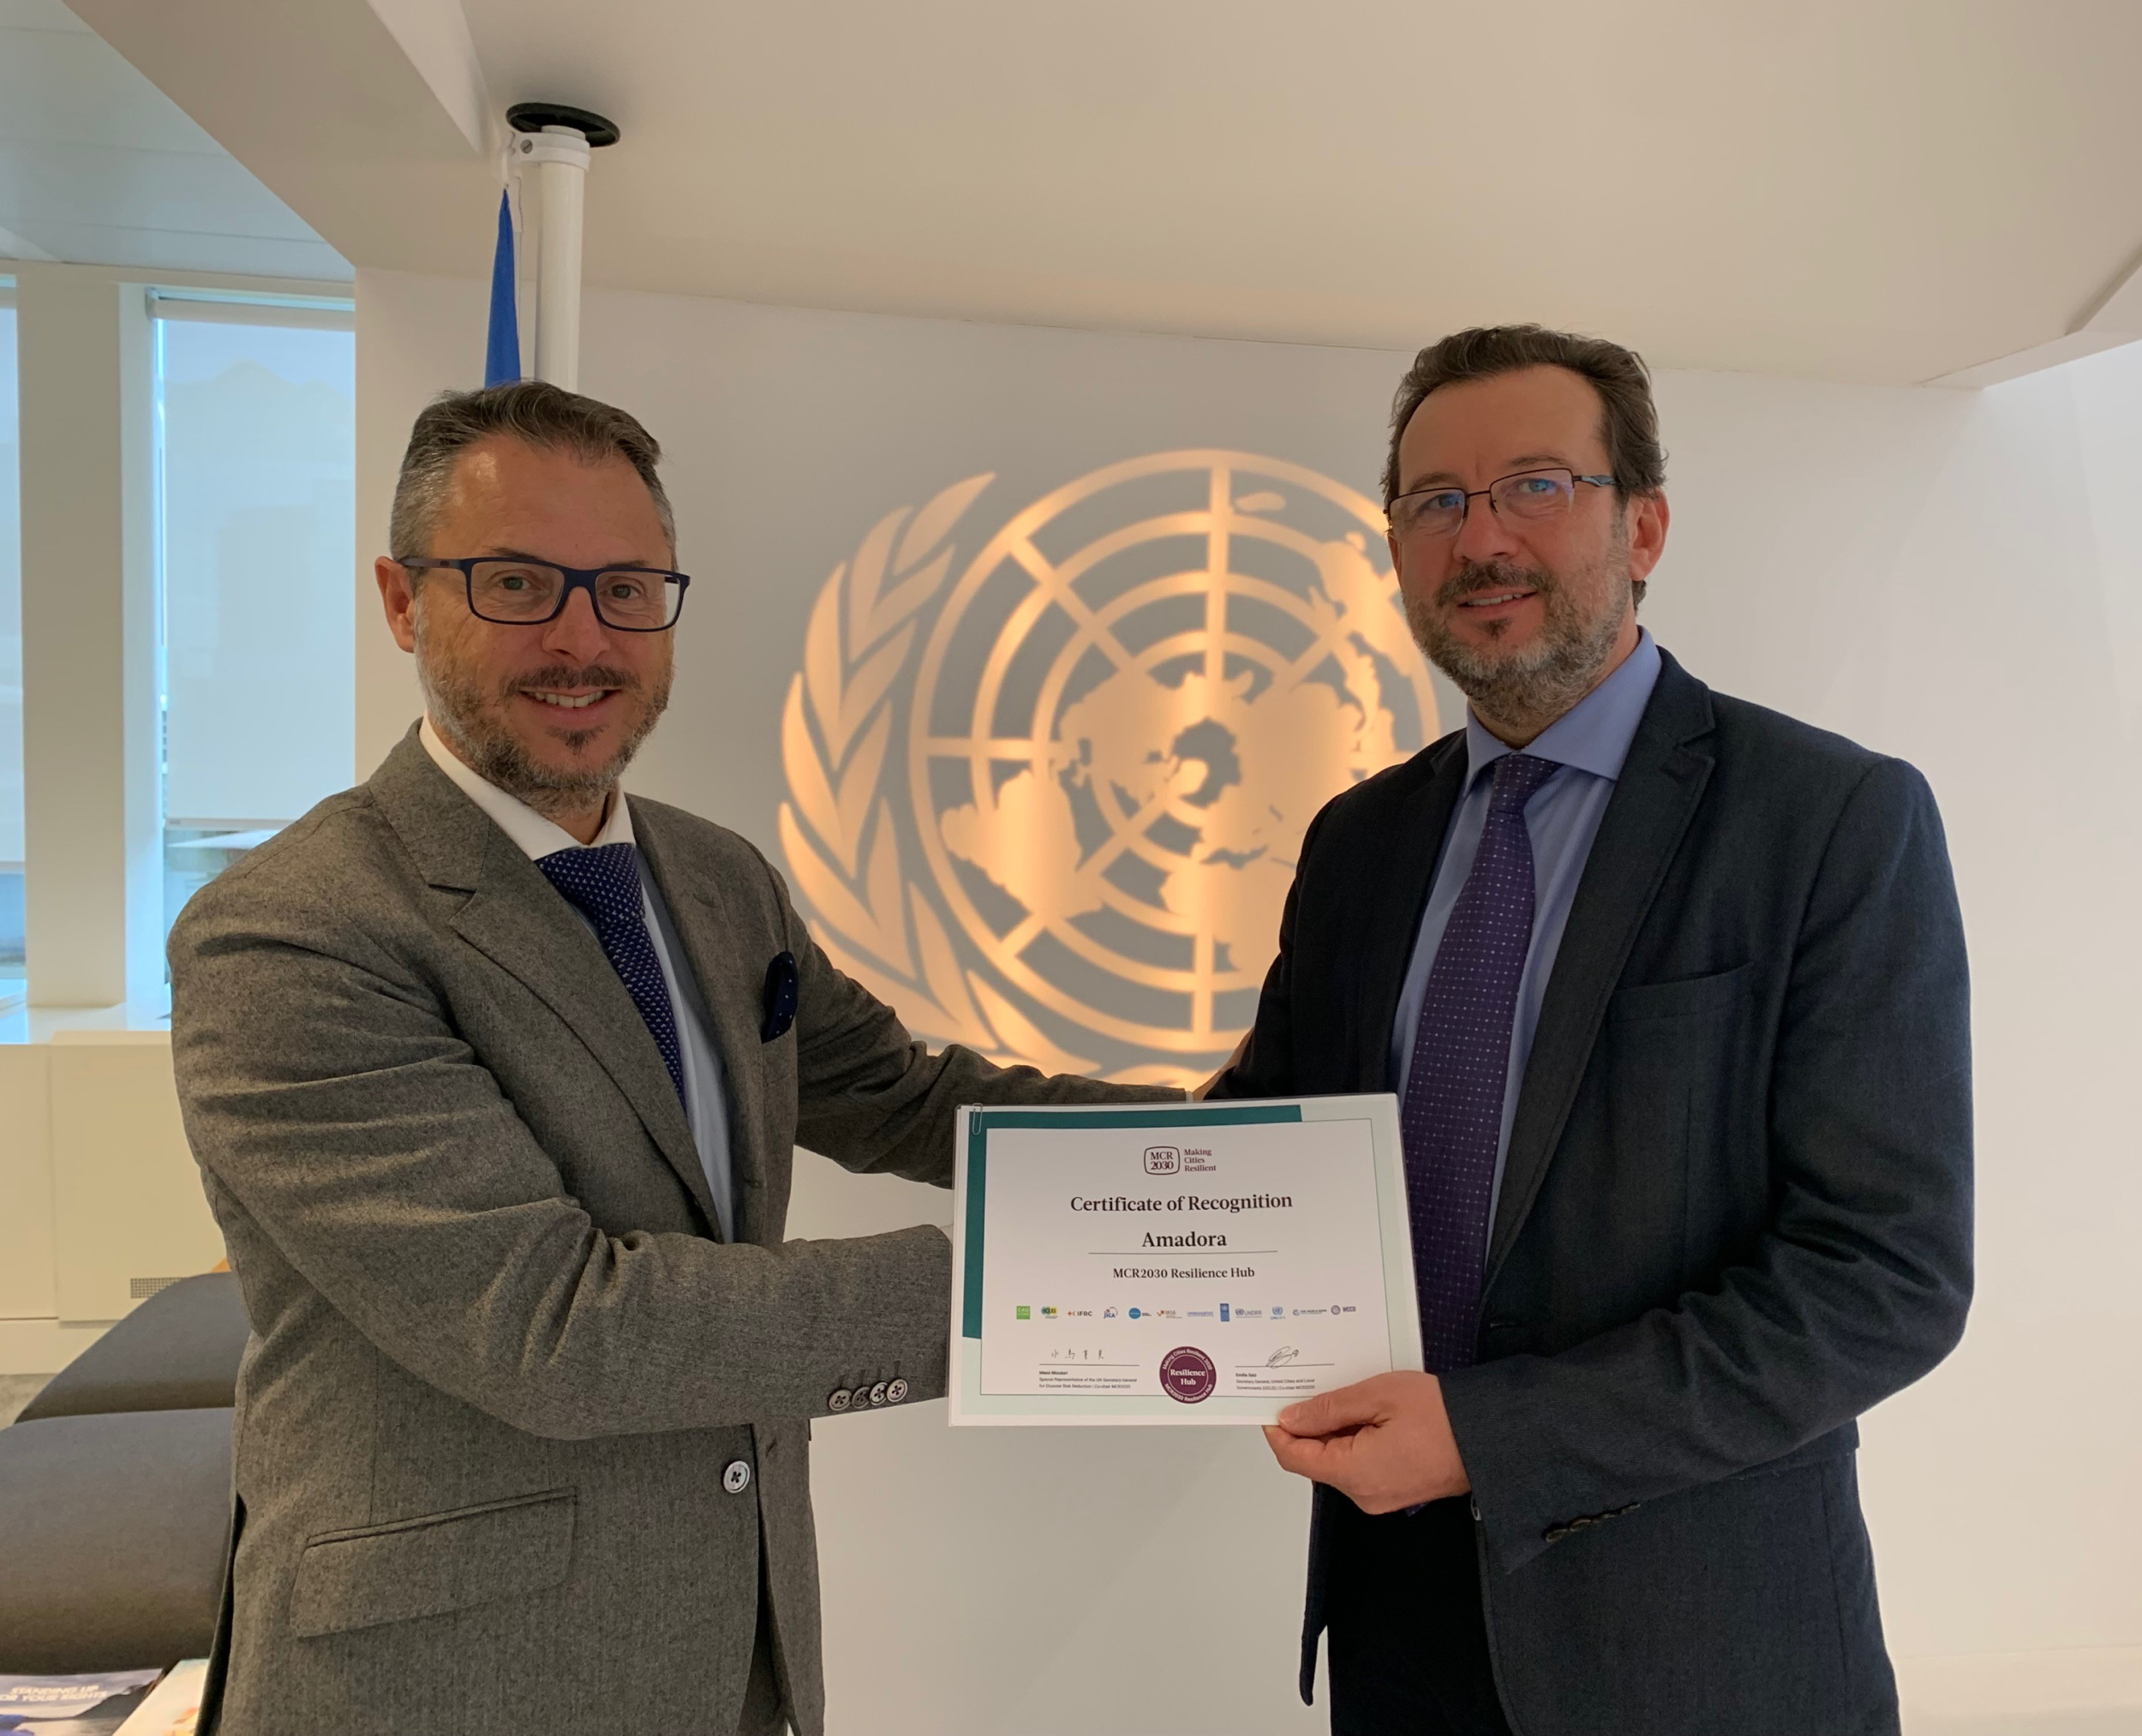 Mr. Luis Lopes, Amadora City Councillor, is presented the MCR2030 Certificate of Recognition by Mr. Octavian Bivol, Chief of UNDRR's Regional Office for Europe & Central Asia